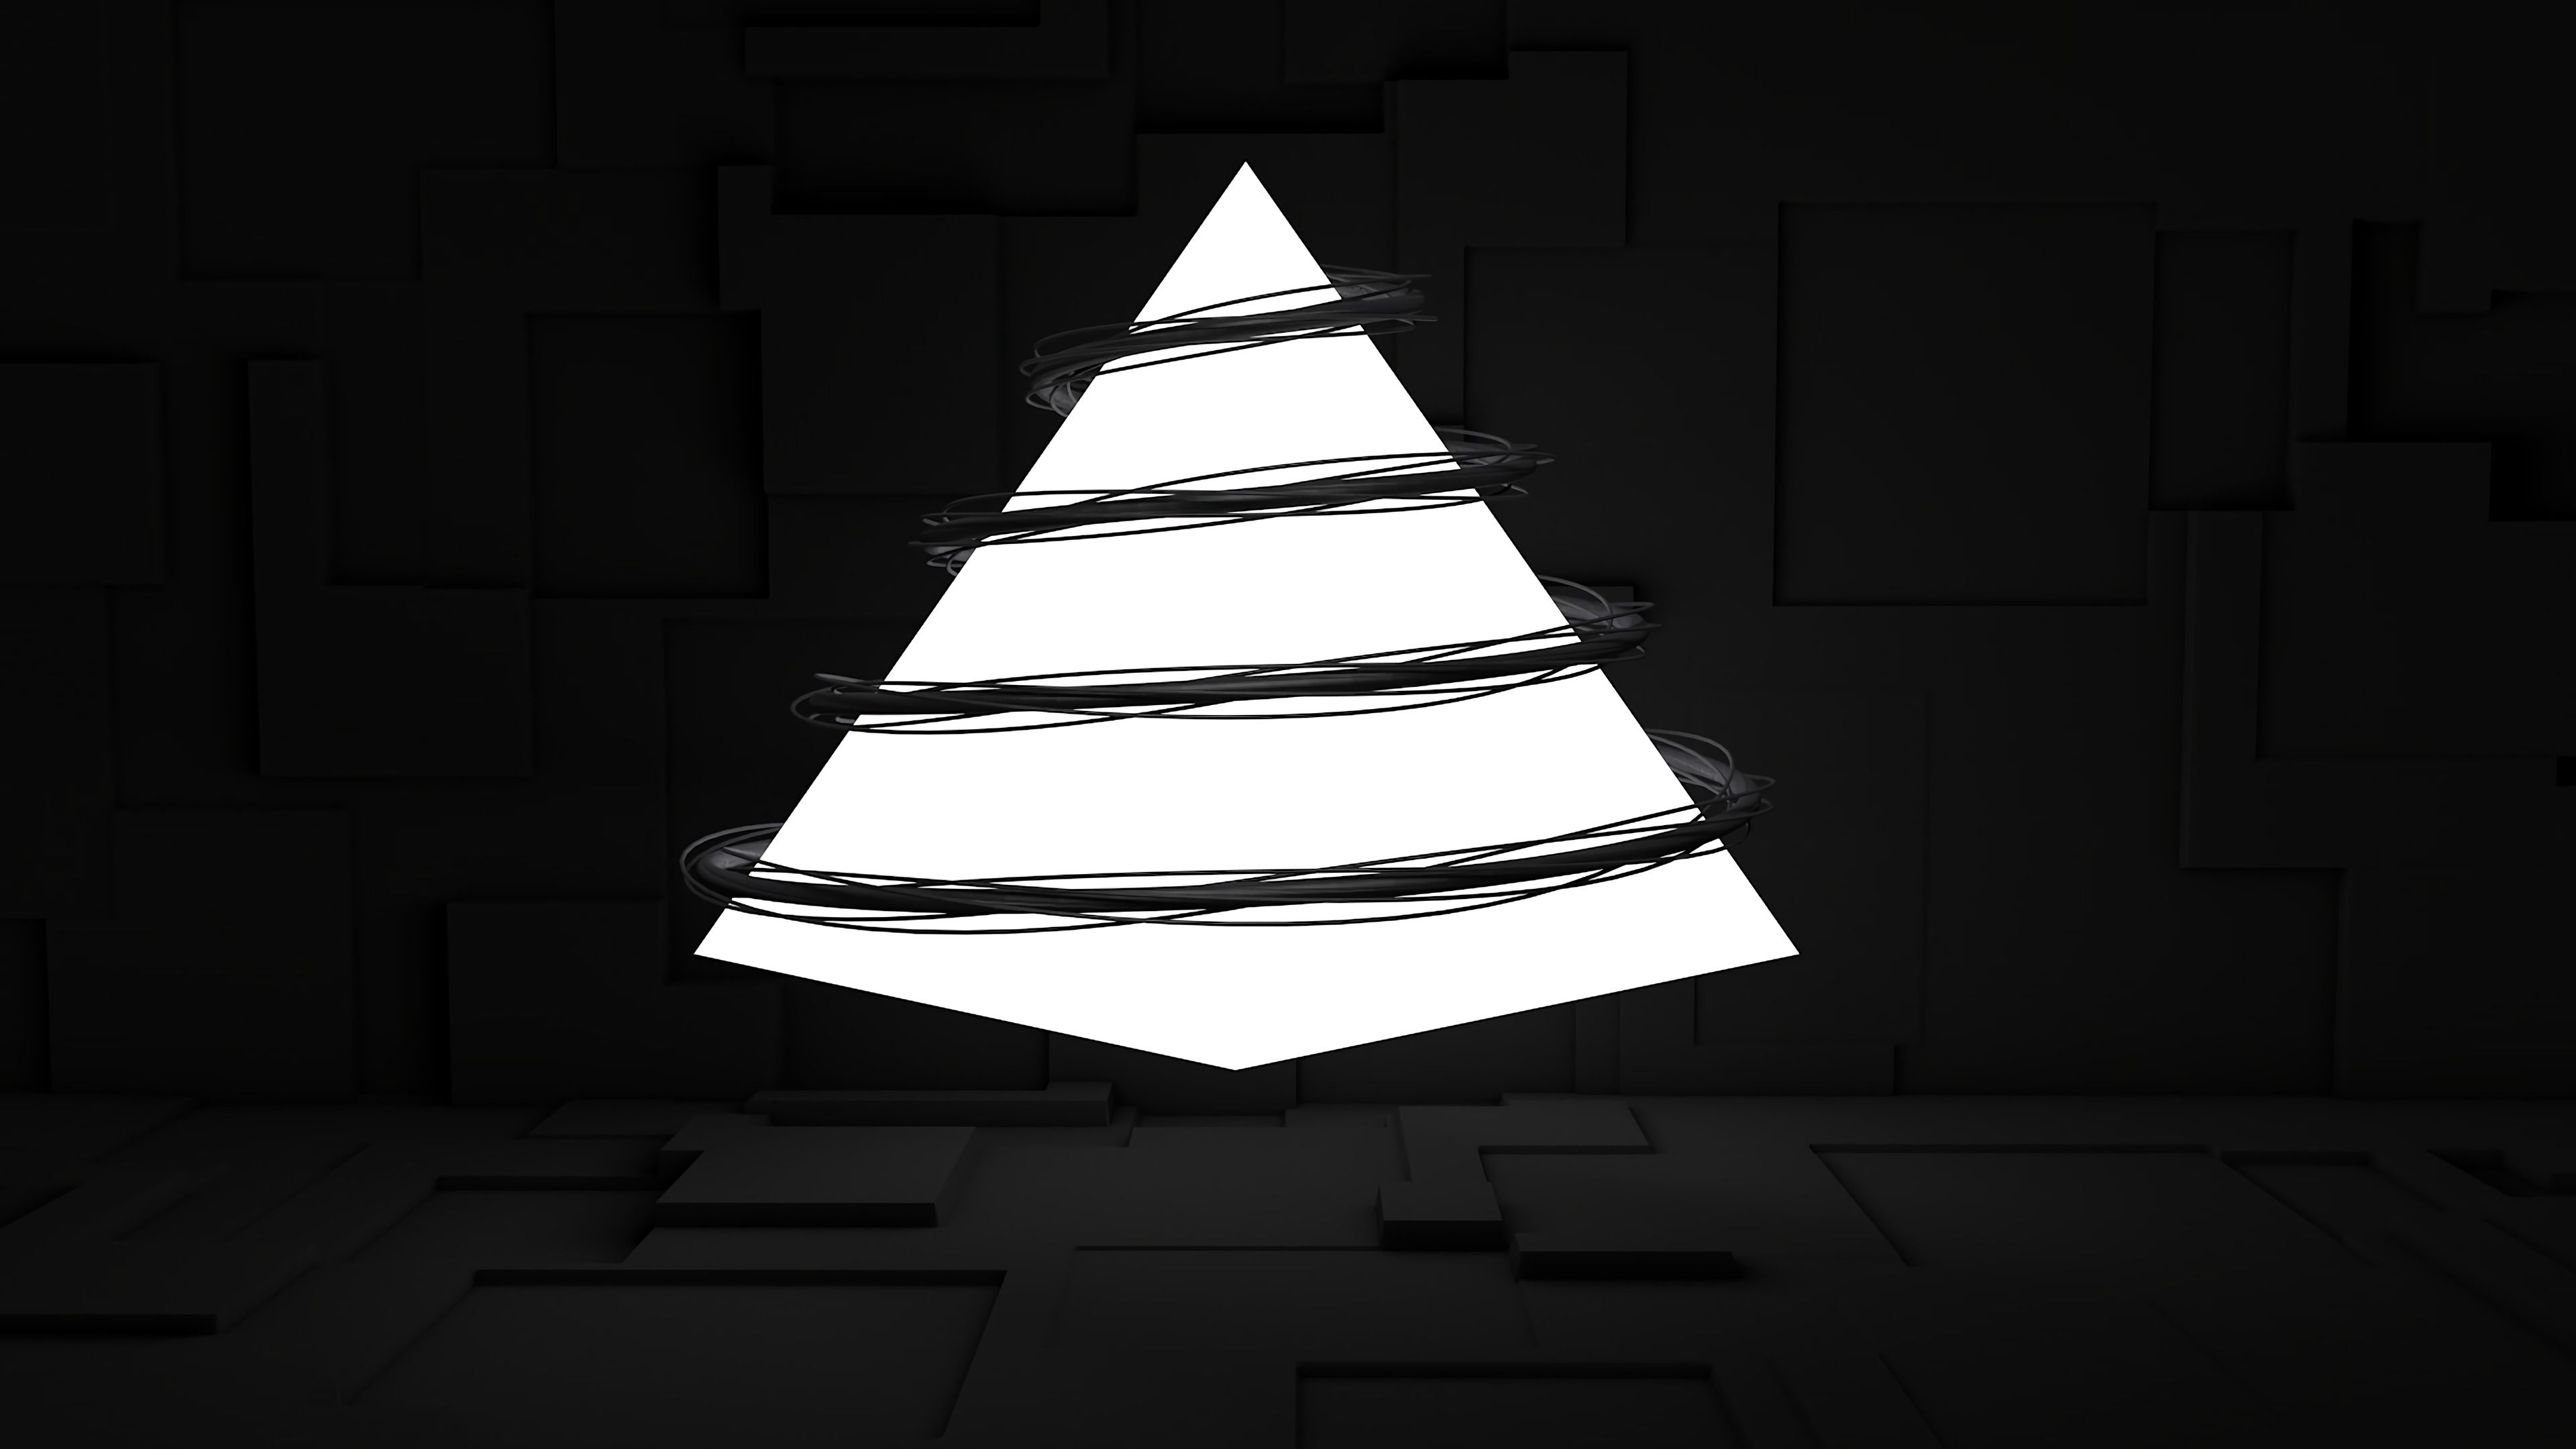 153272 Screensavers and Wallpapers Pyramid for phone. Download 3d, surface, glow, spiral, volume, pyramid pictures for free